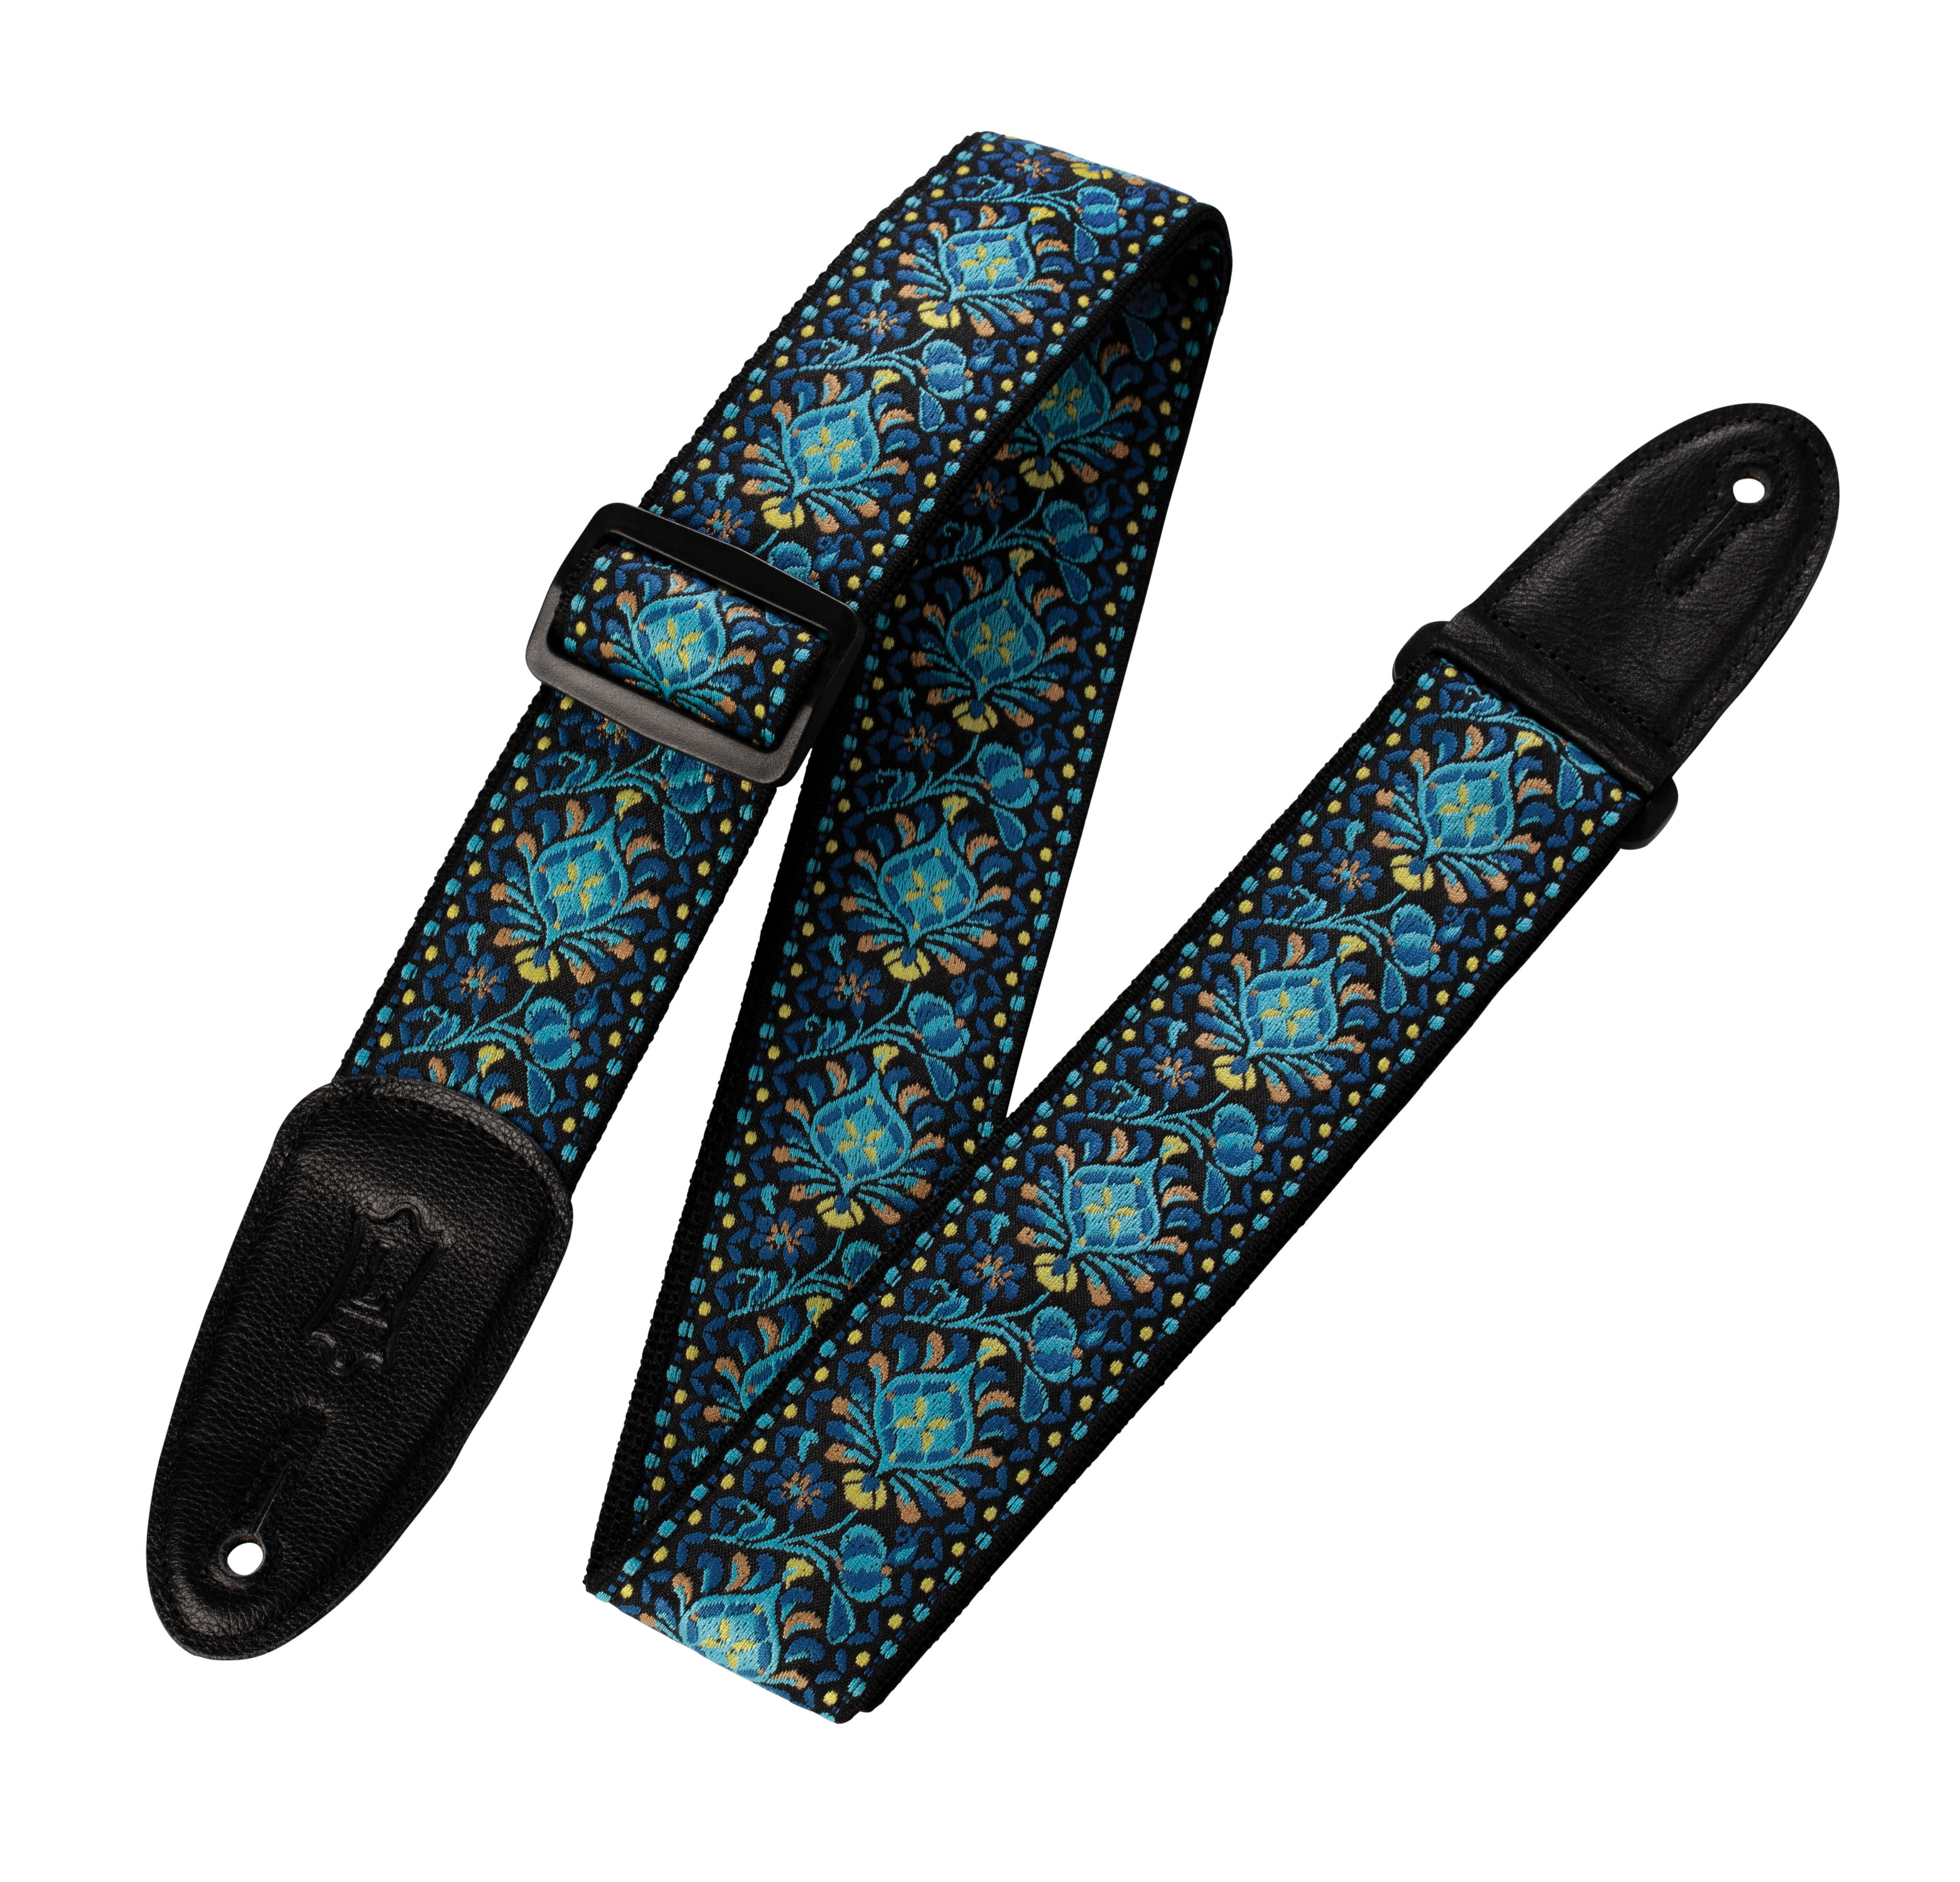 2 Electric Guitar Strap Acoustic Strap Bass Strap with 6 Free Guitar Picks Guitar Strap Jacquard Weave Hootenanny Style Lightening Blue